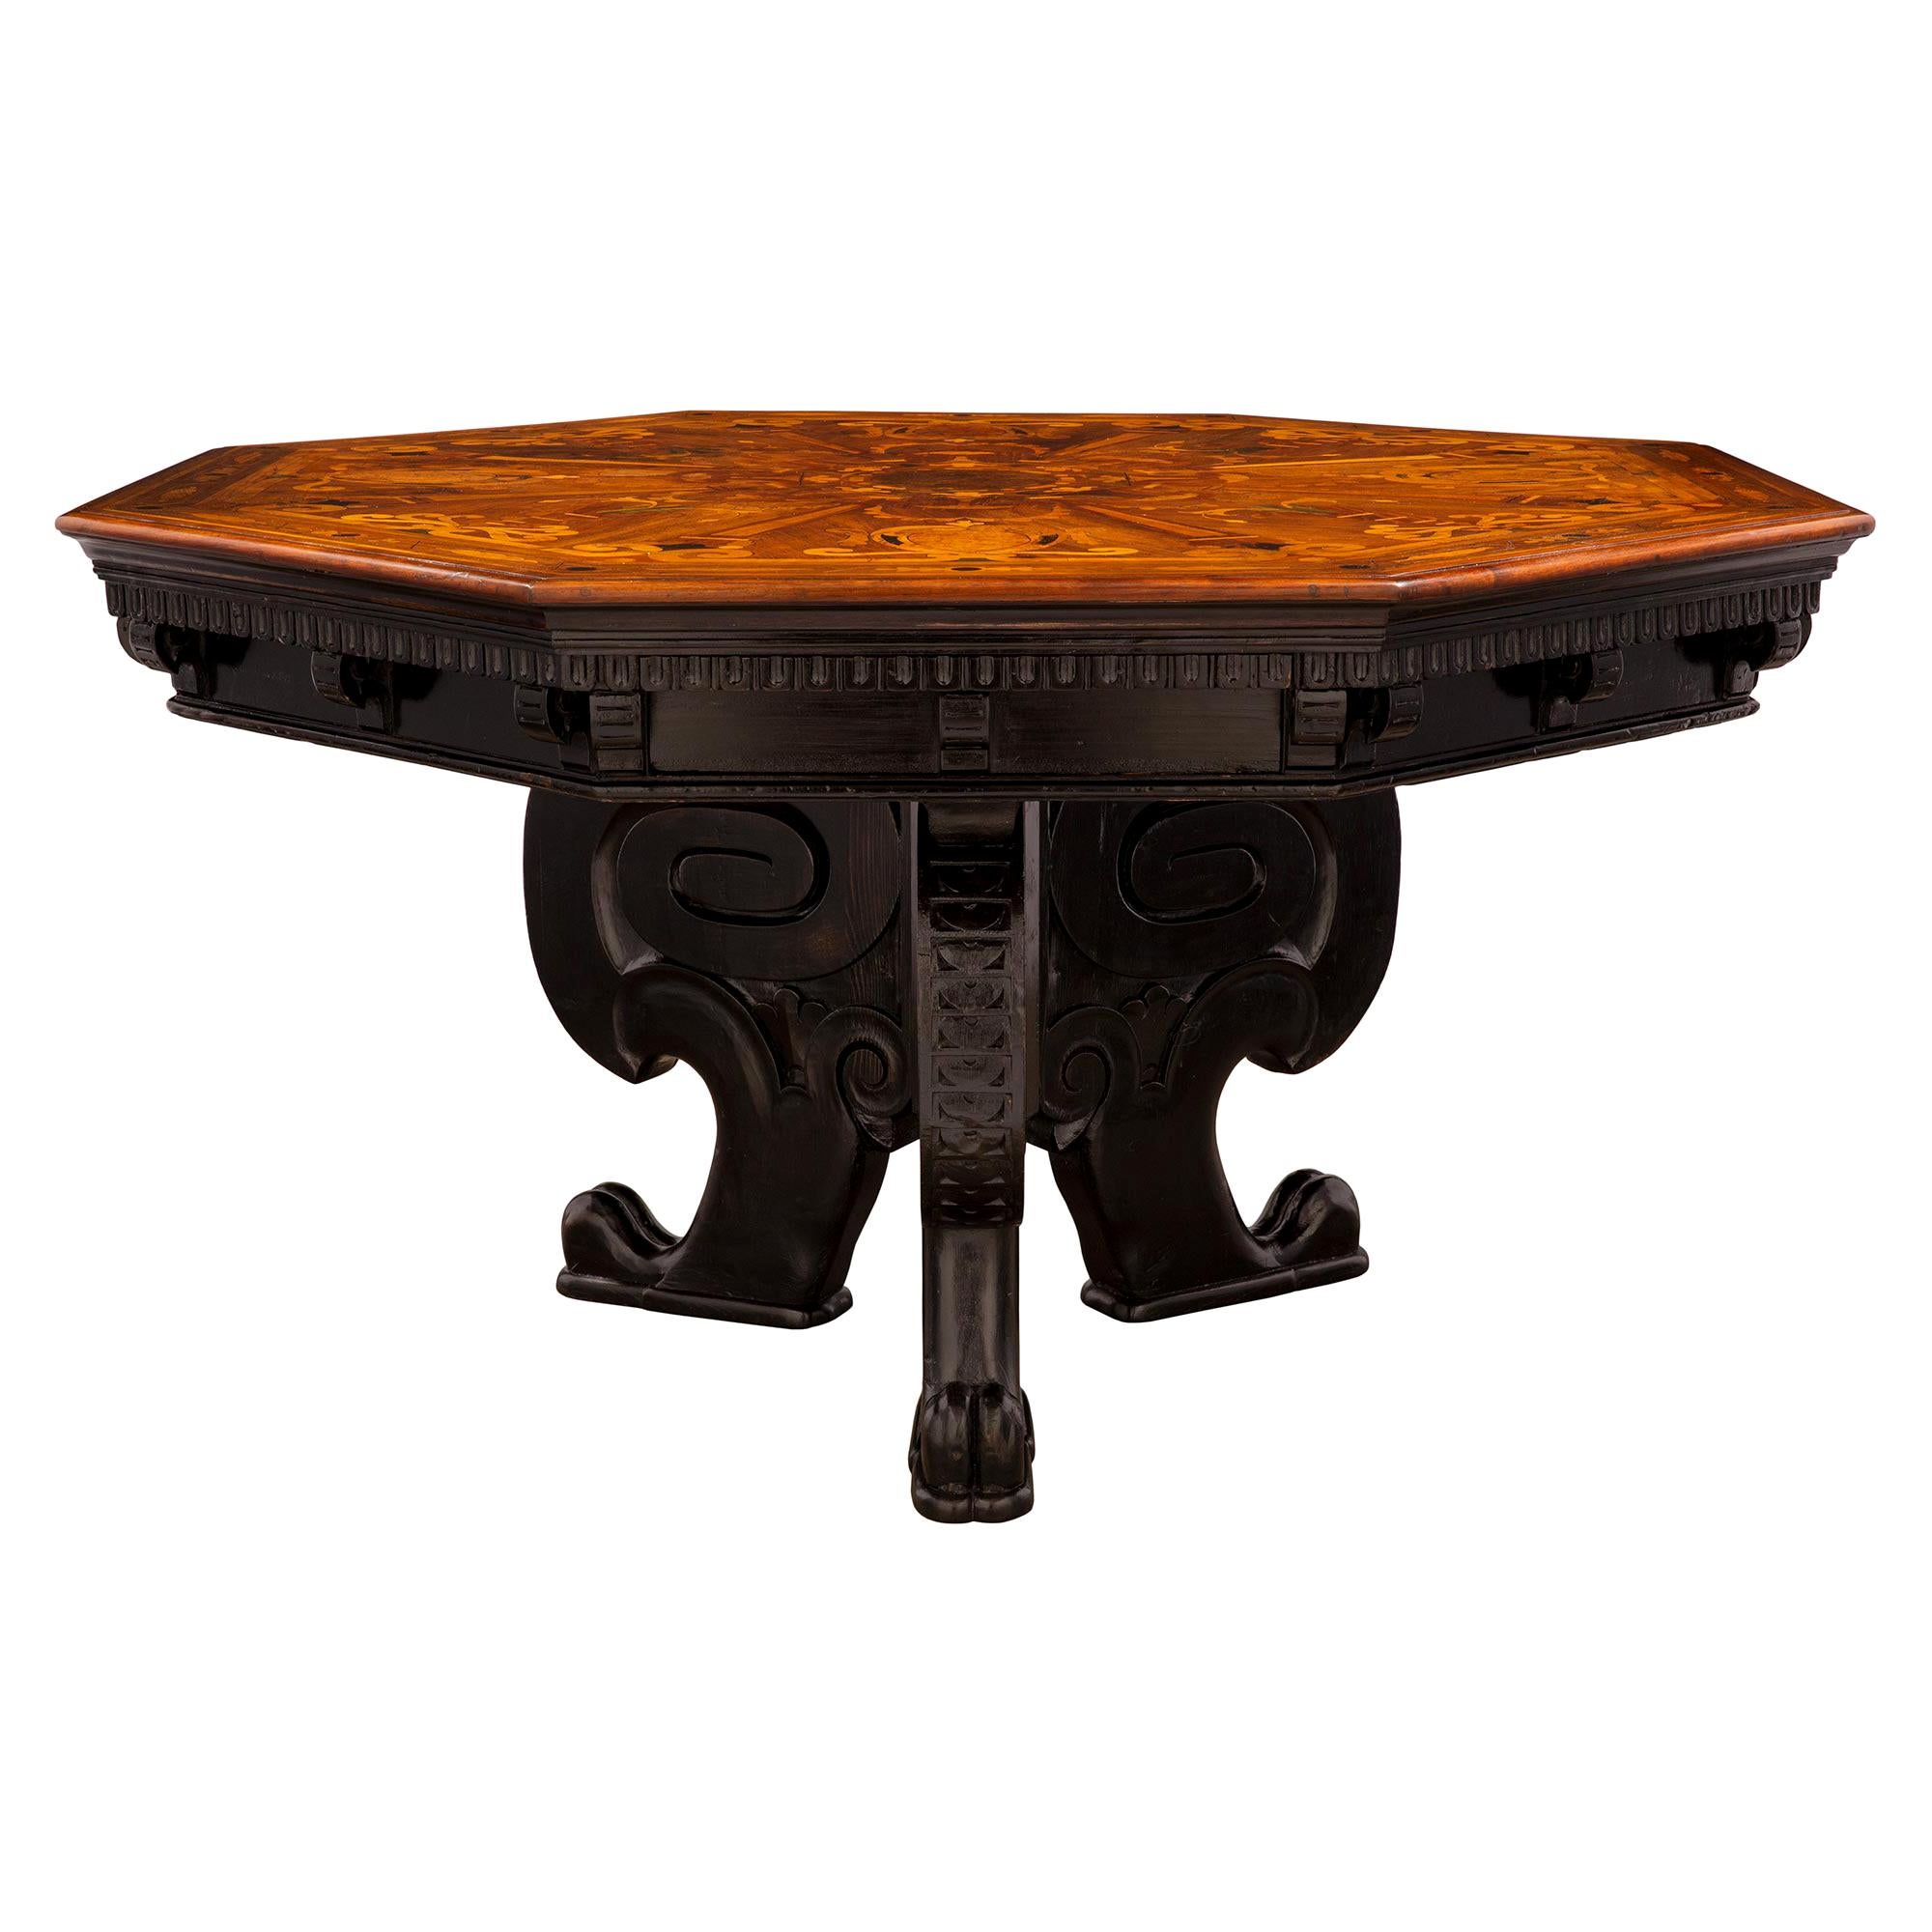 Italian Early 18th Century Baroque Period Octagonal Center Table For Sale